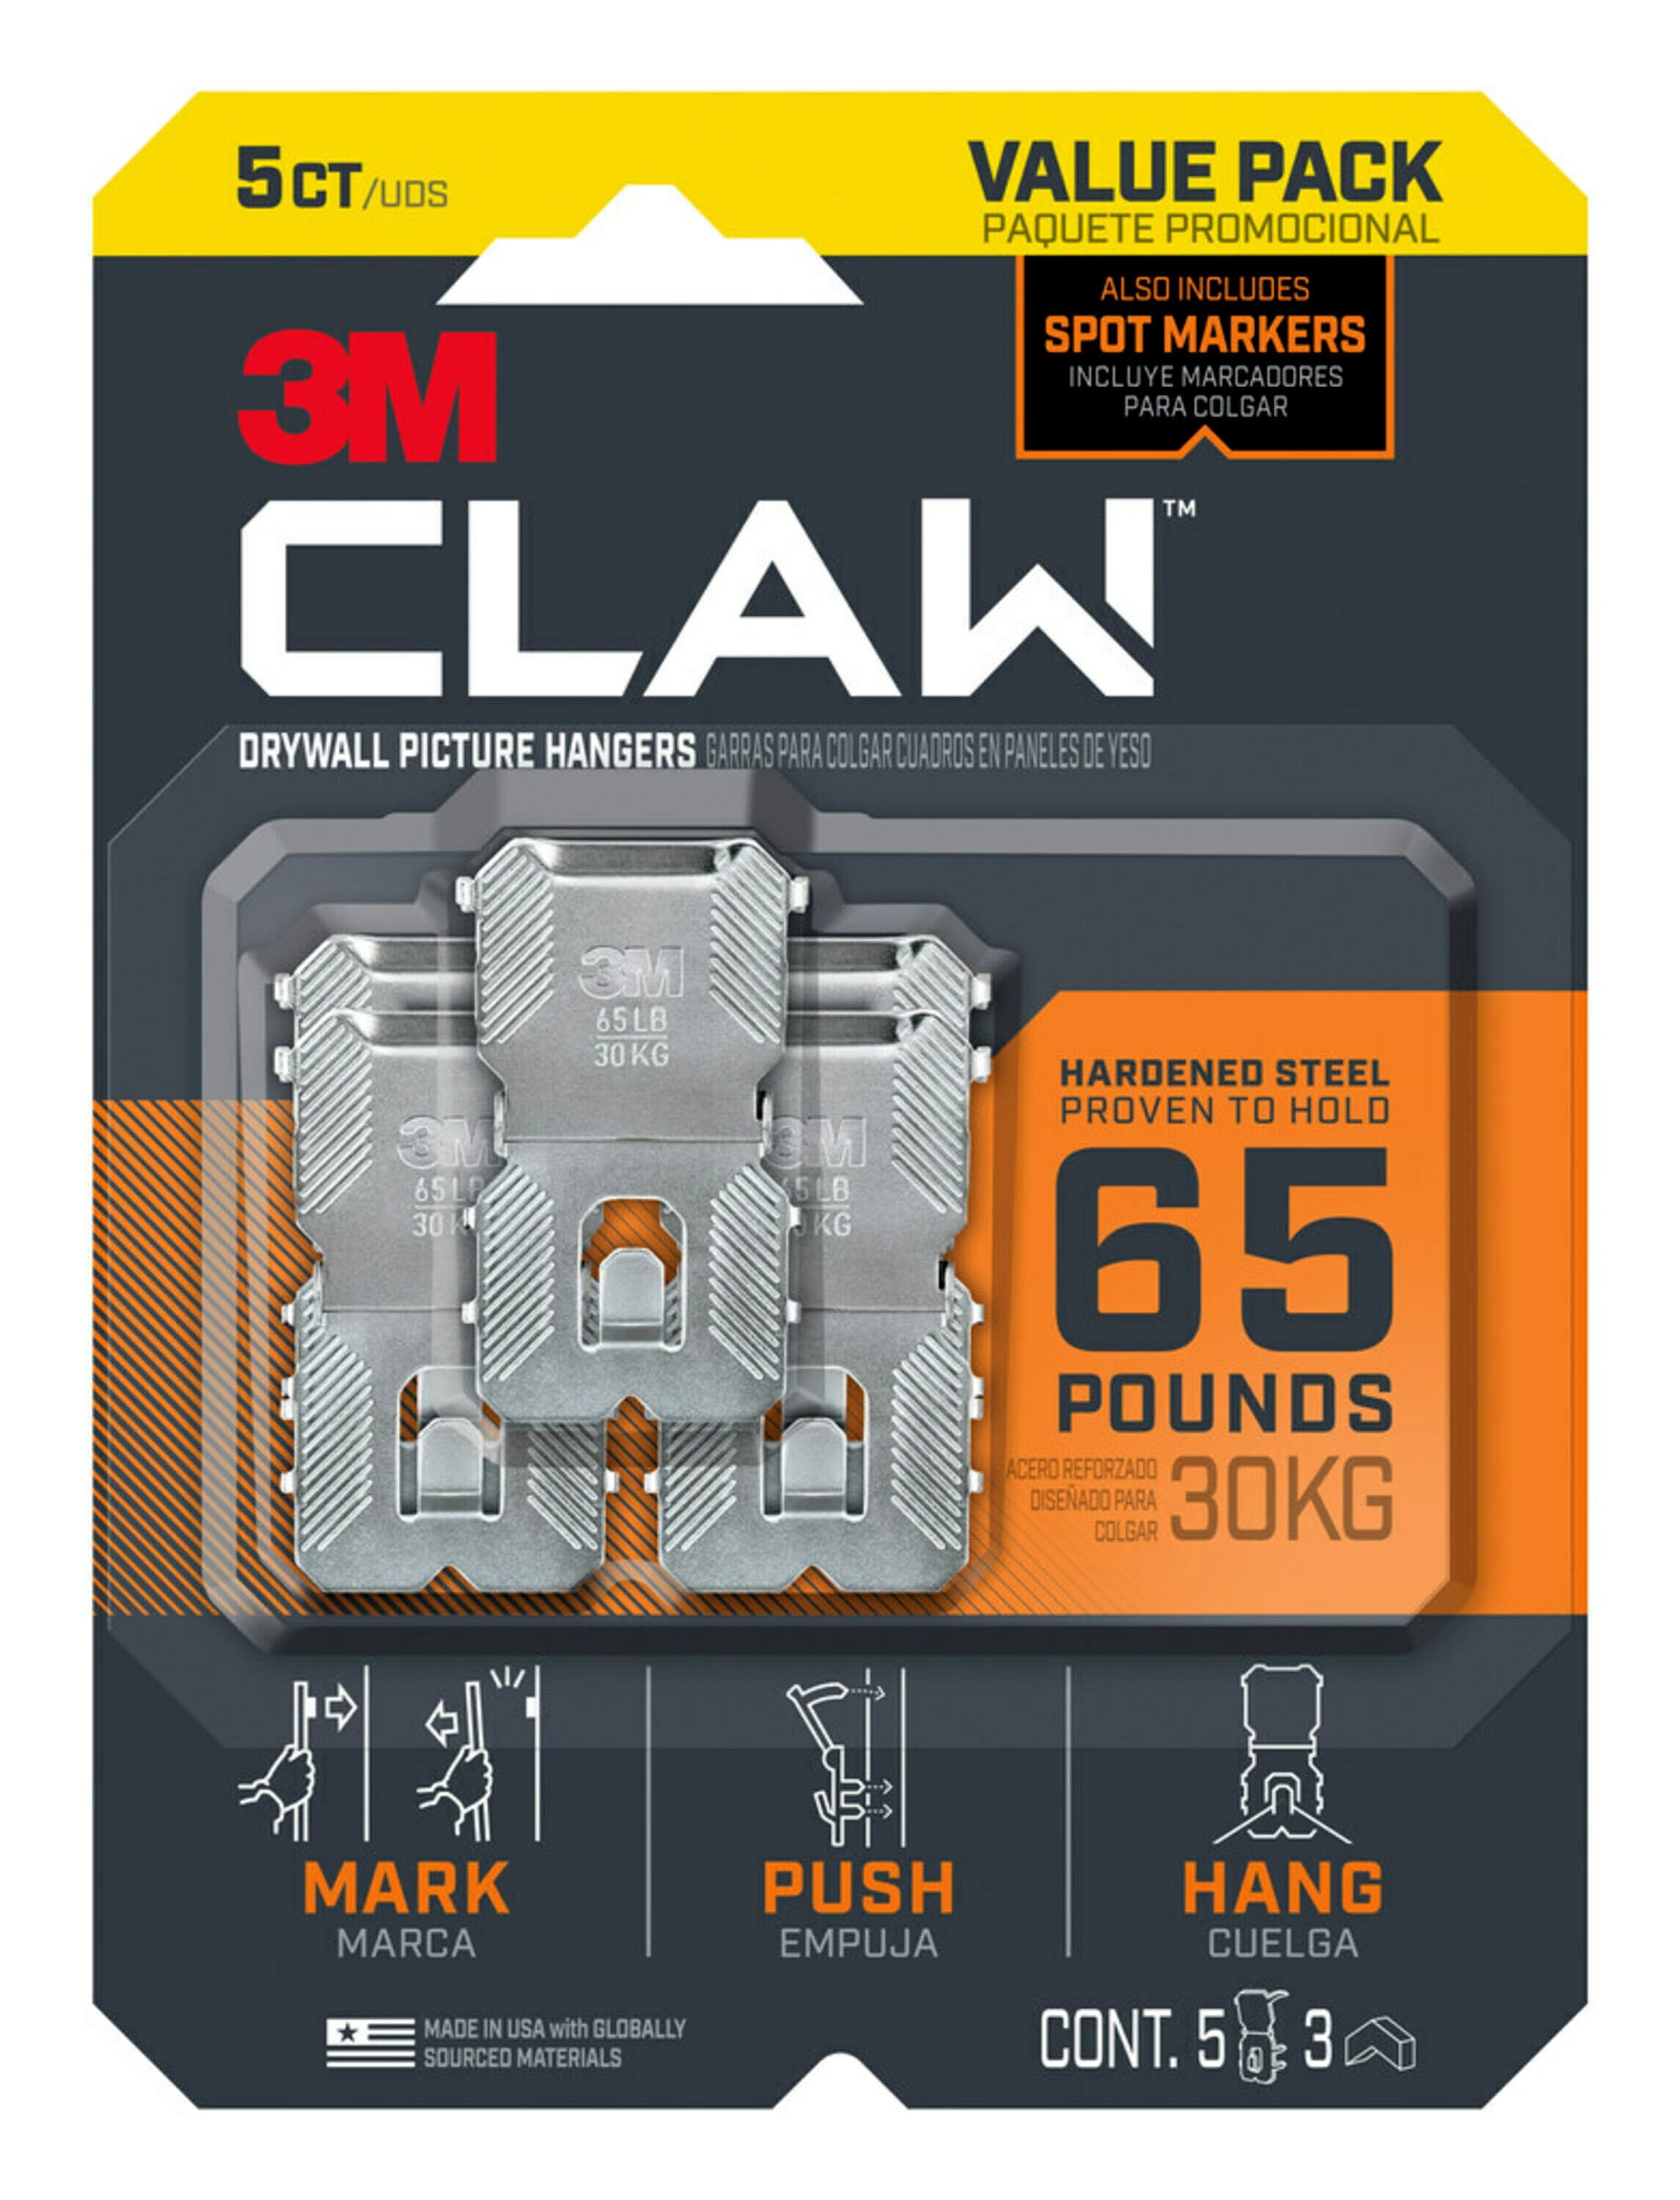 3M CLAW Drywall Picture Hanger with Spot Marker, Holds 65 lbs, 5